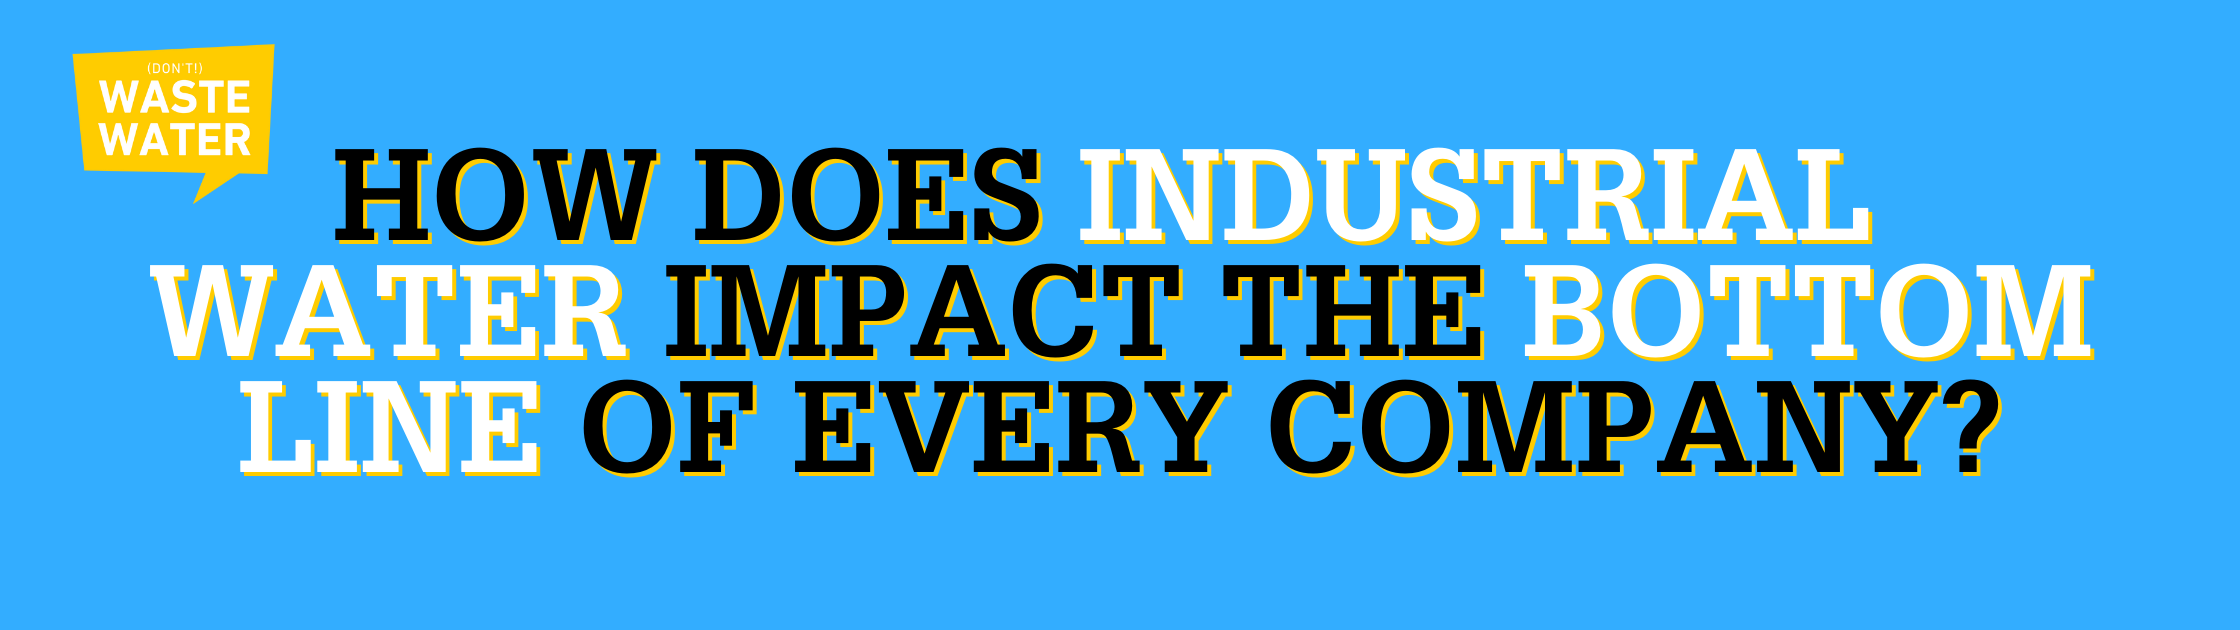 How does Industrial Water Impact the Bottom Line of Every company?